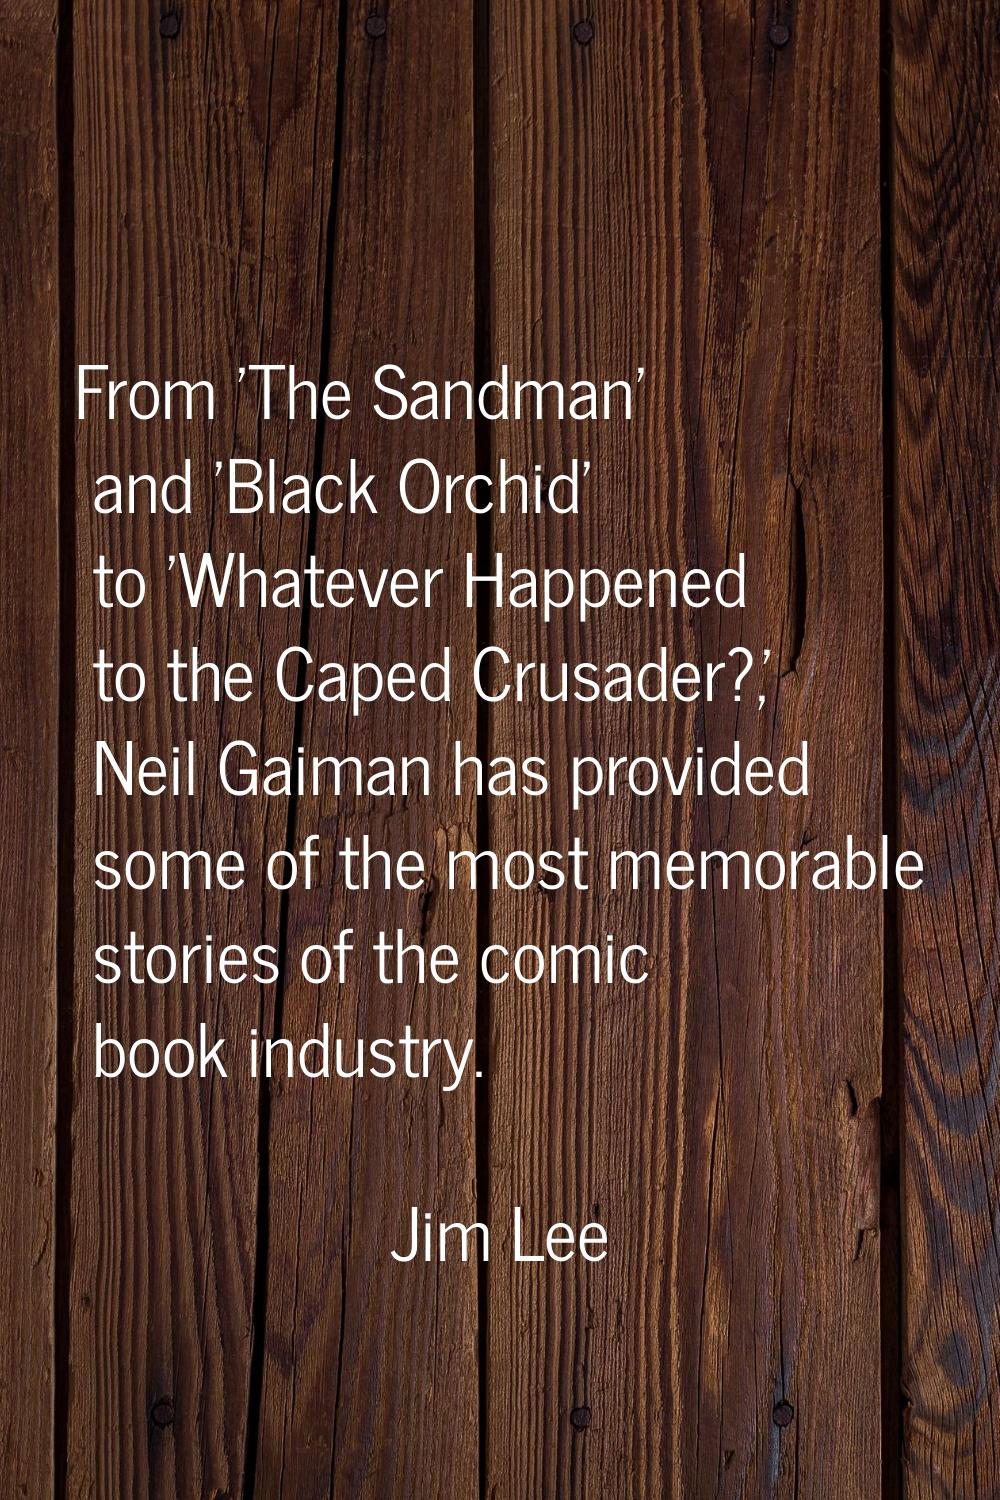 From 'The Sandman' and 'Black Orchid' to 'Whatever Happened to the Caped Crusader?,' Neil Gaiman ha